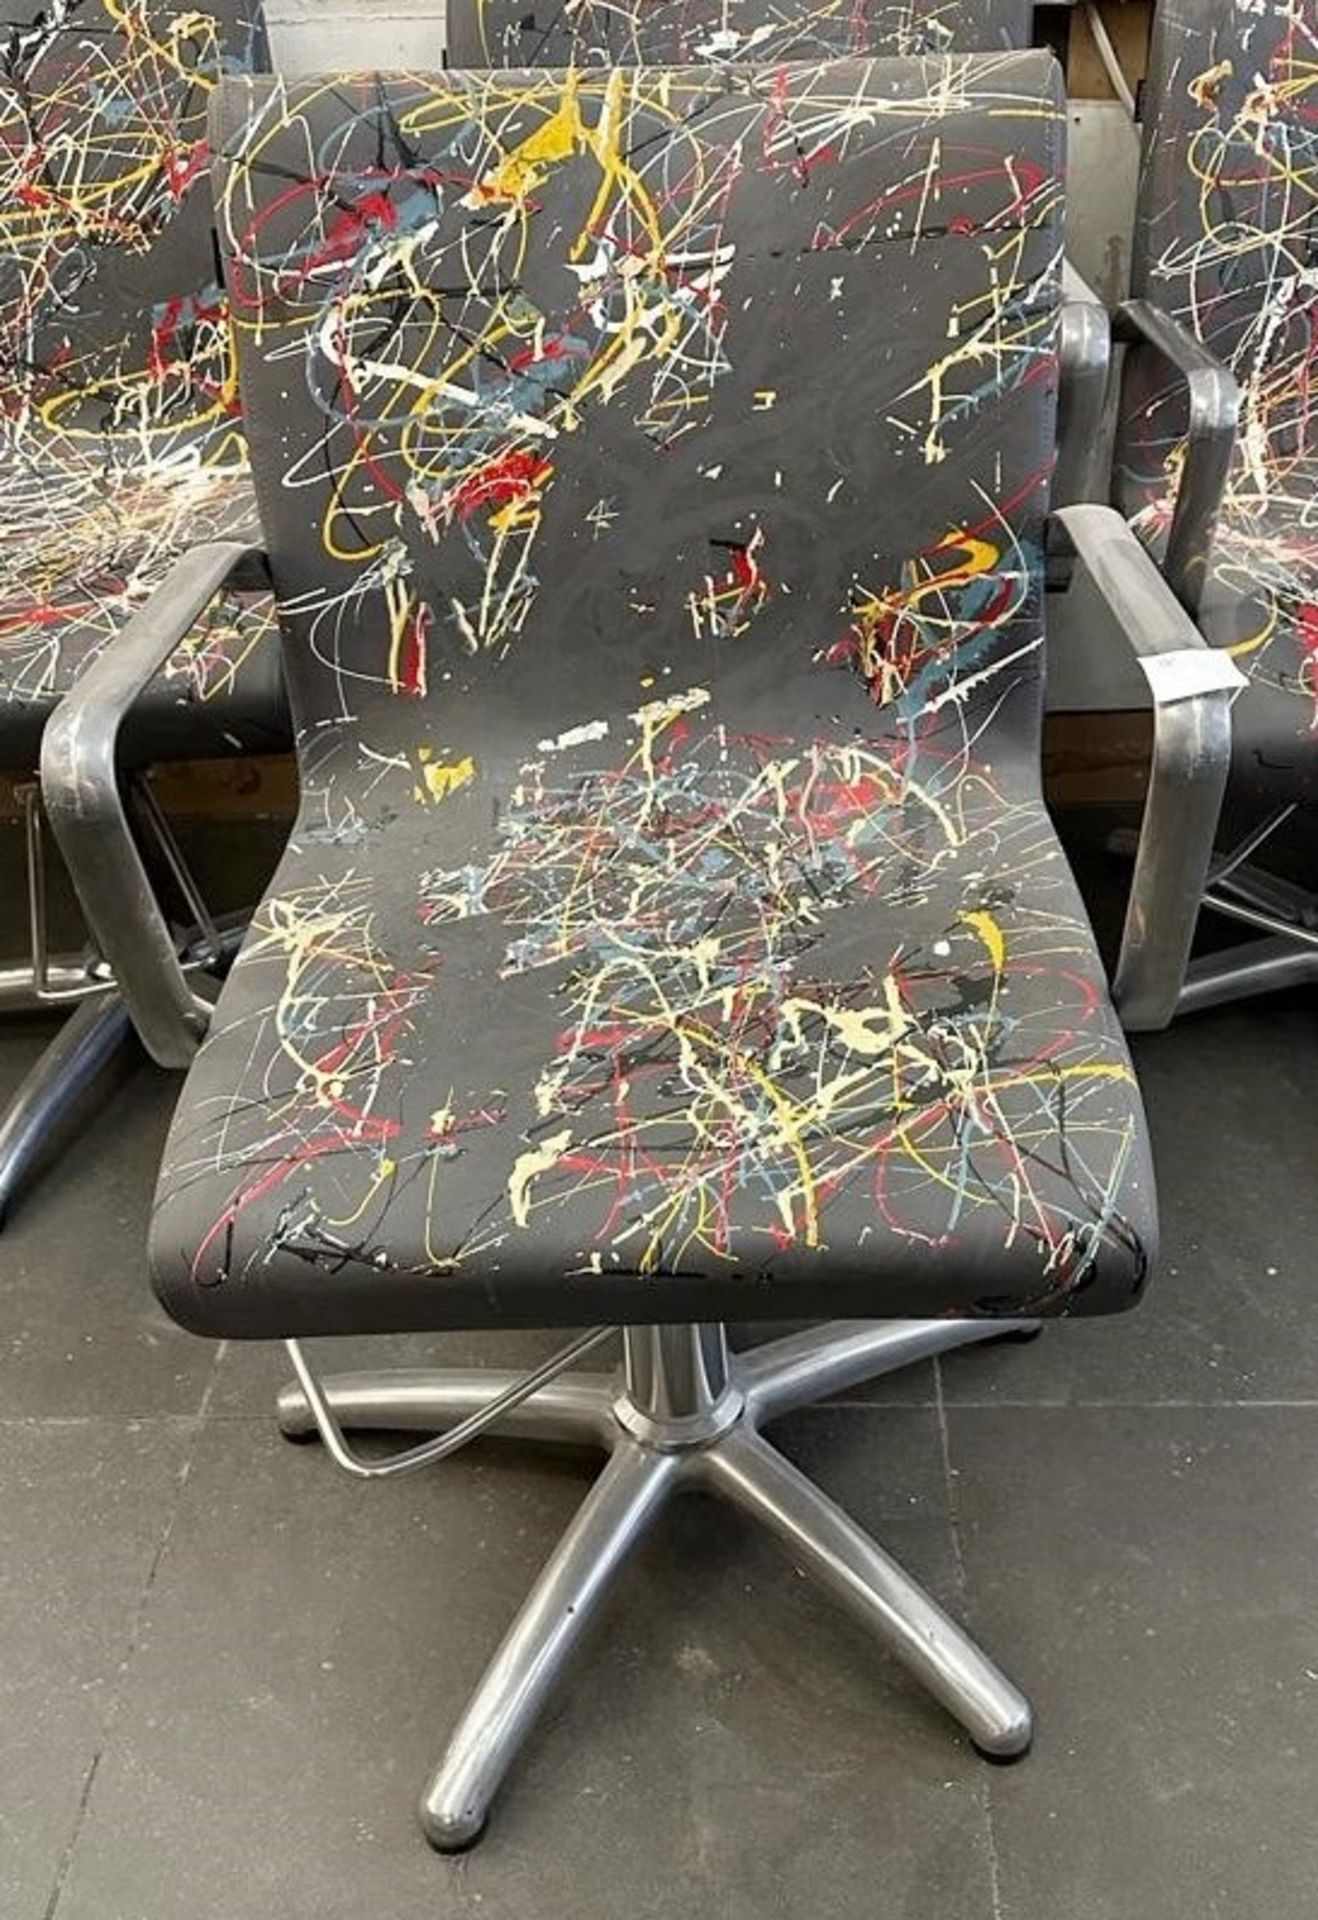 1 x REM Leather Stylist Chair Featuring Especially Commissioned Abstract Paintwork By A Renowned - Image 7 of 7